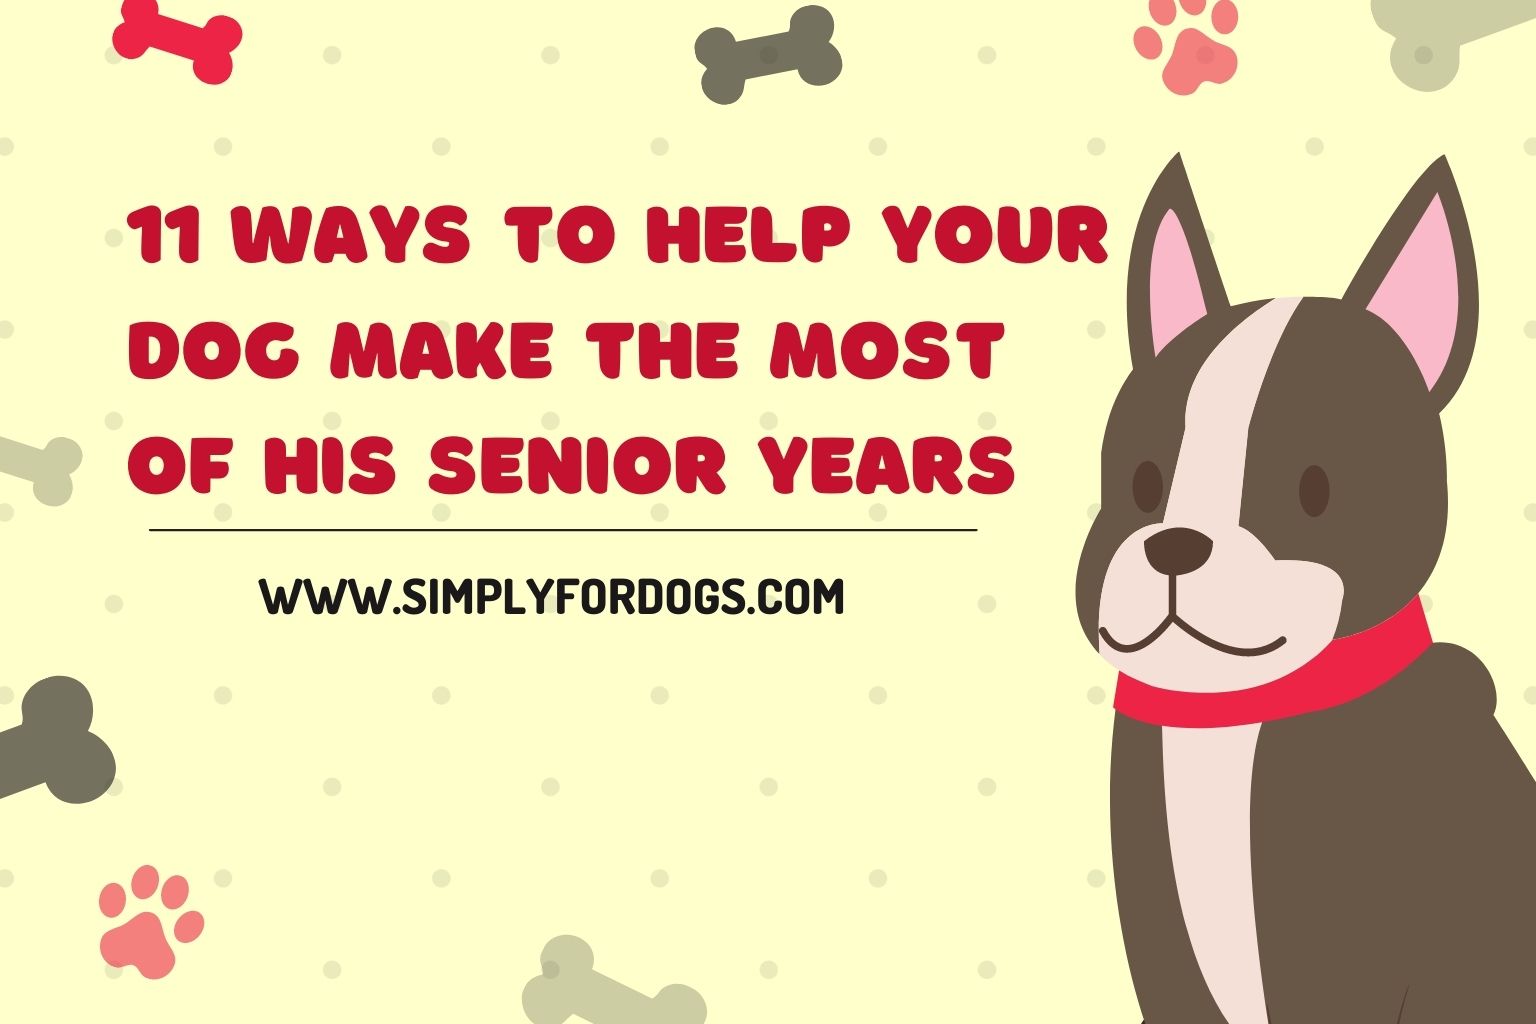 11 Ways to Help Your Dog Make the Most of His Senior Years